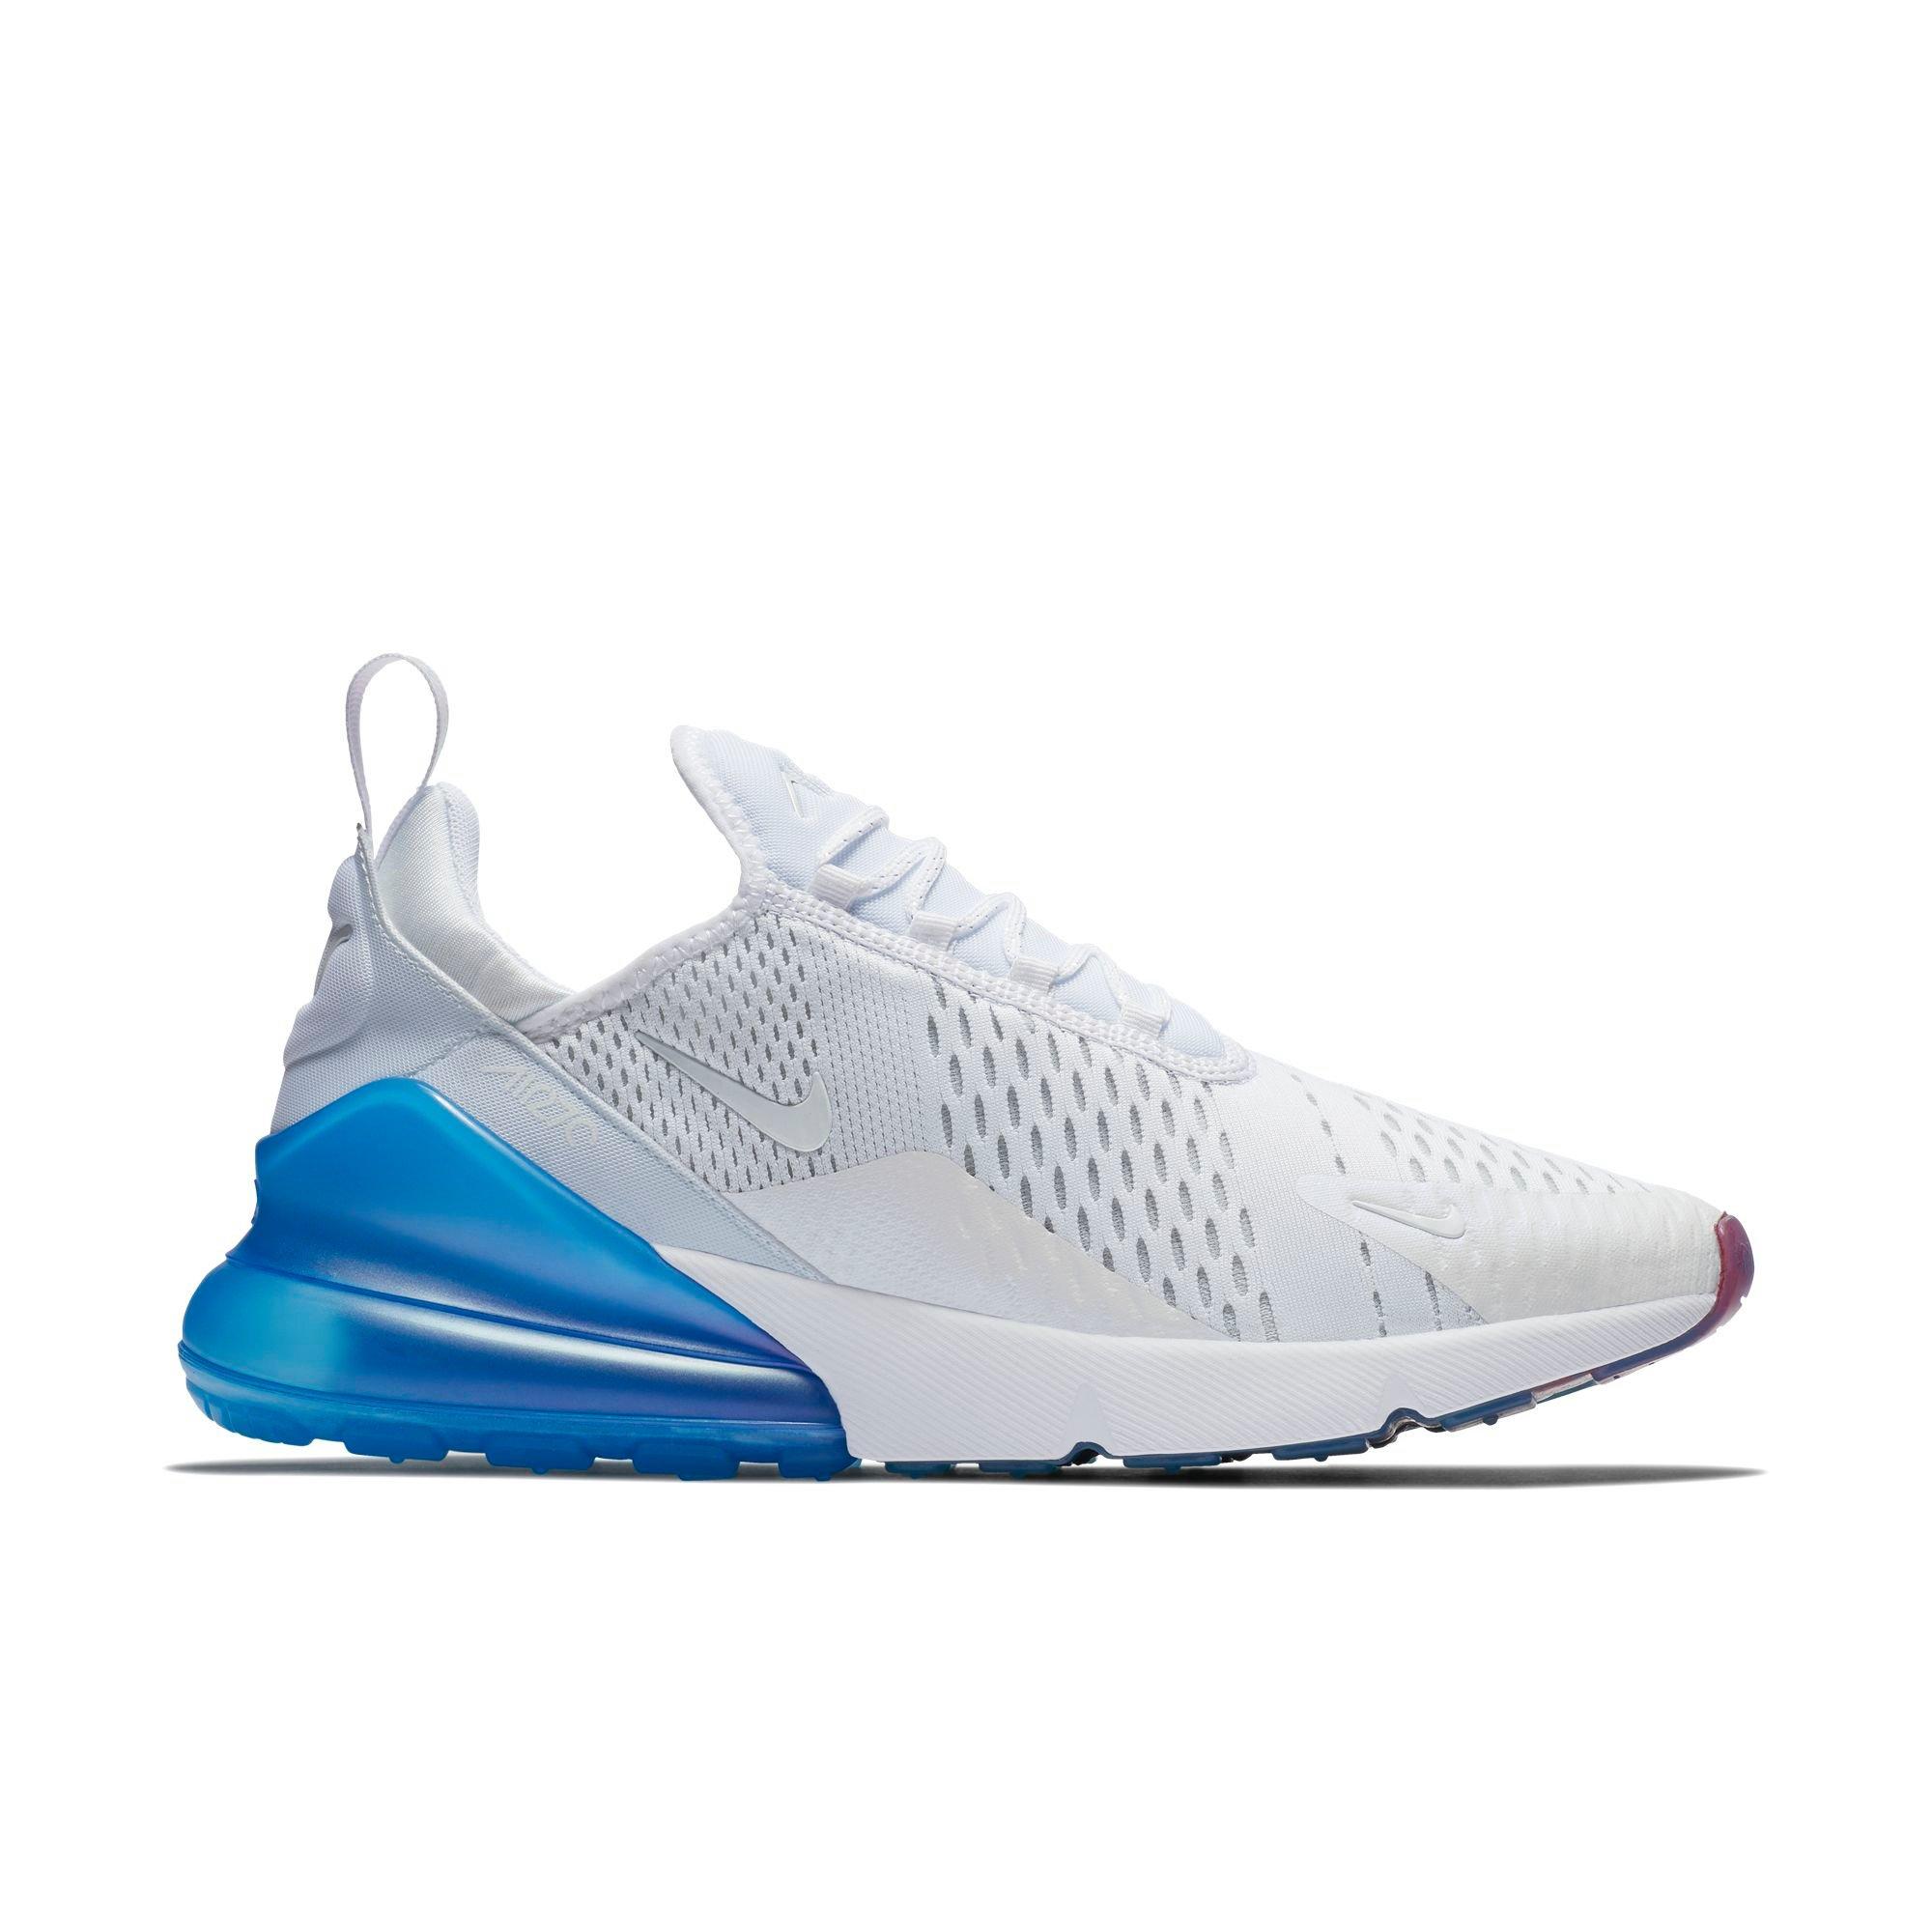 air max 270 men's white and blue